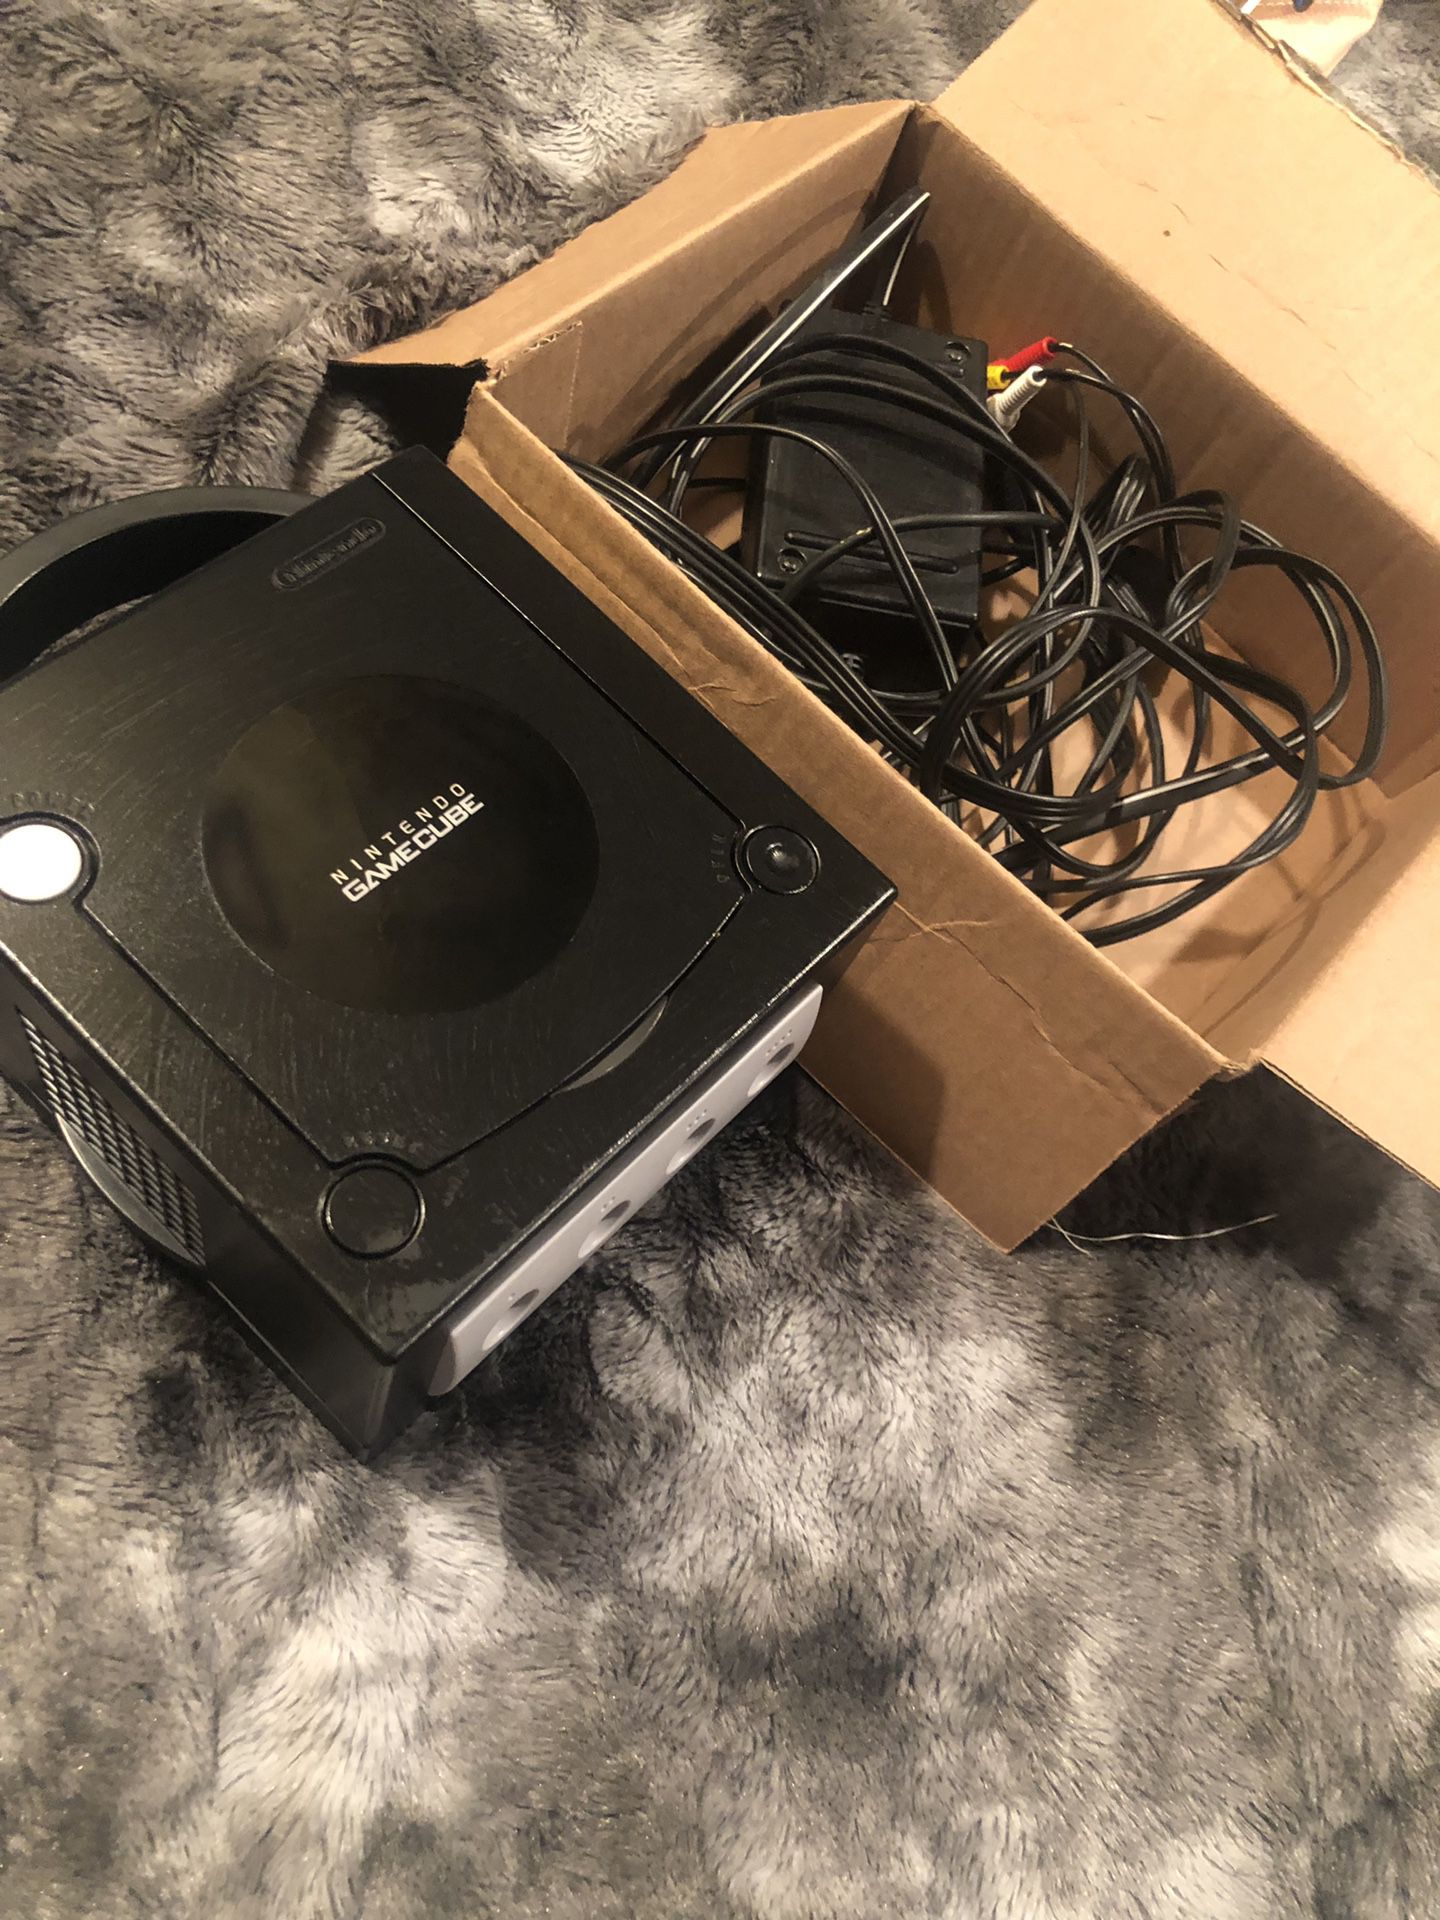 Nintendo GameCube for sale - the controller port acts a little finicky and needs a new one/to be cleaned